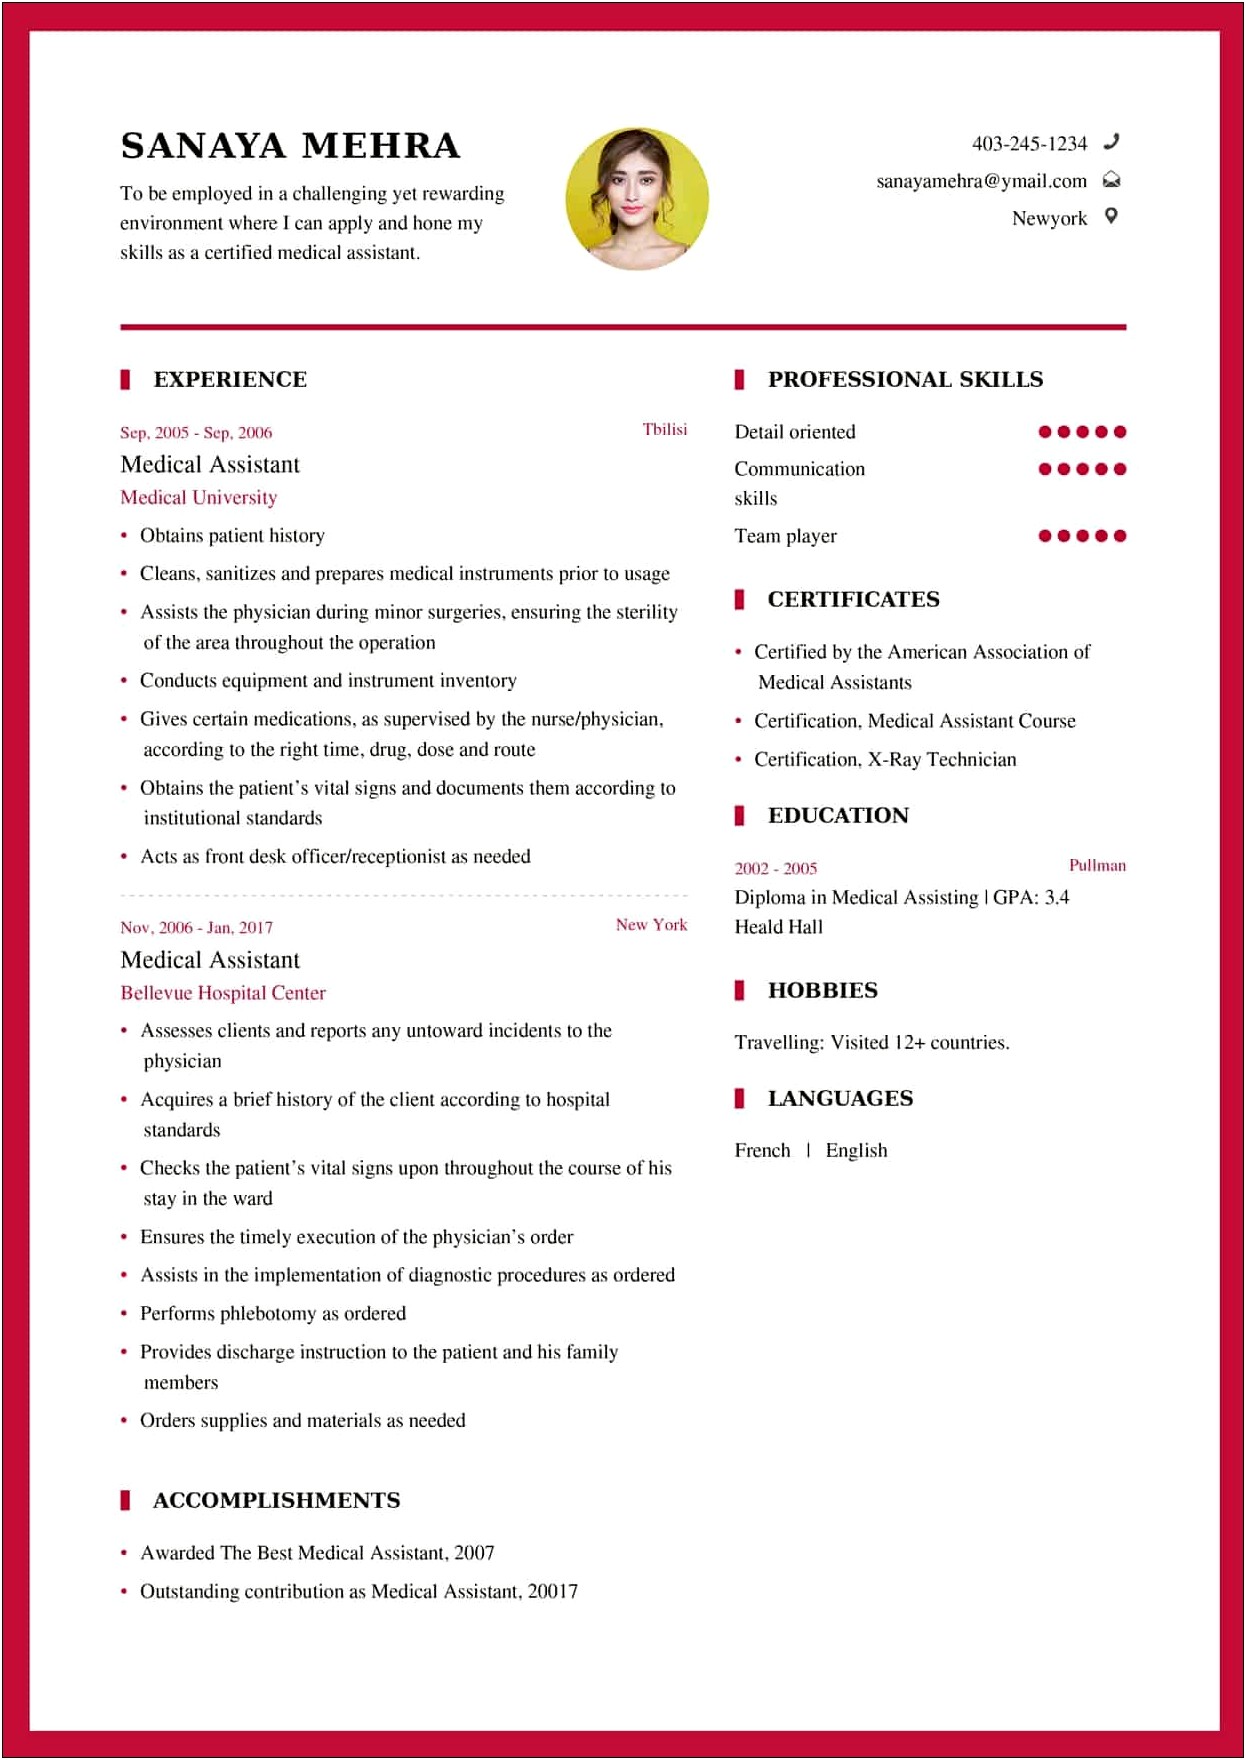 Example Of Certified Medical Assistant Resume